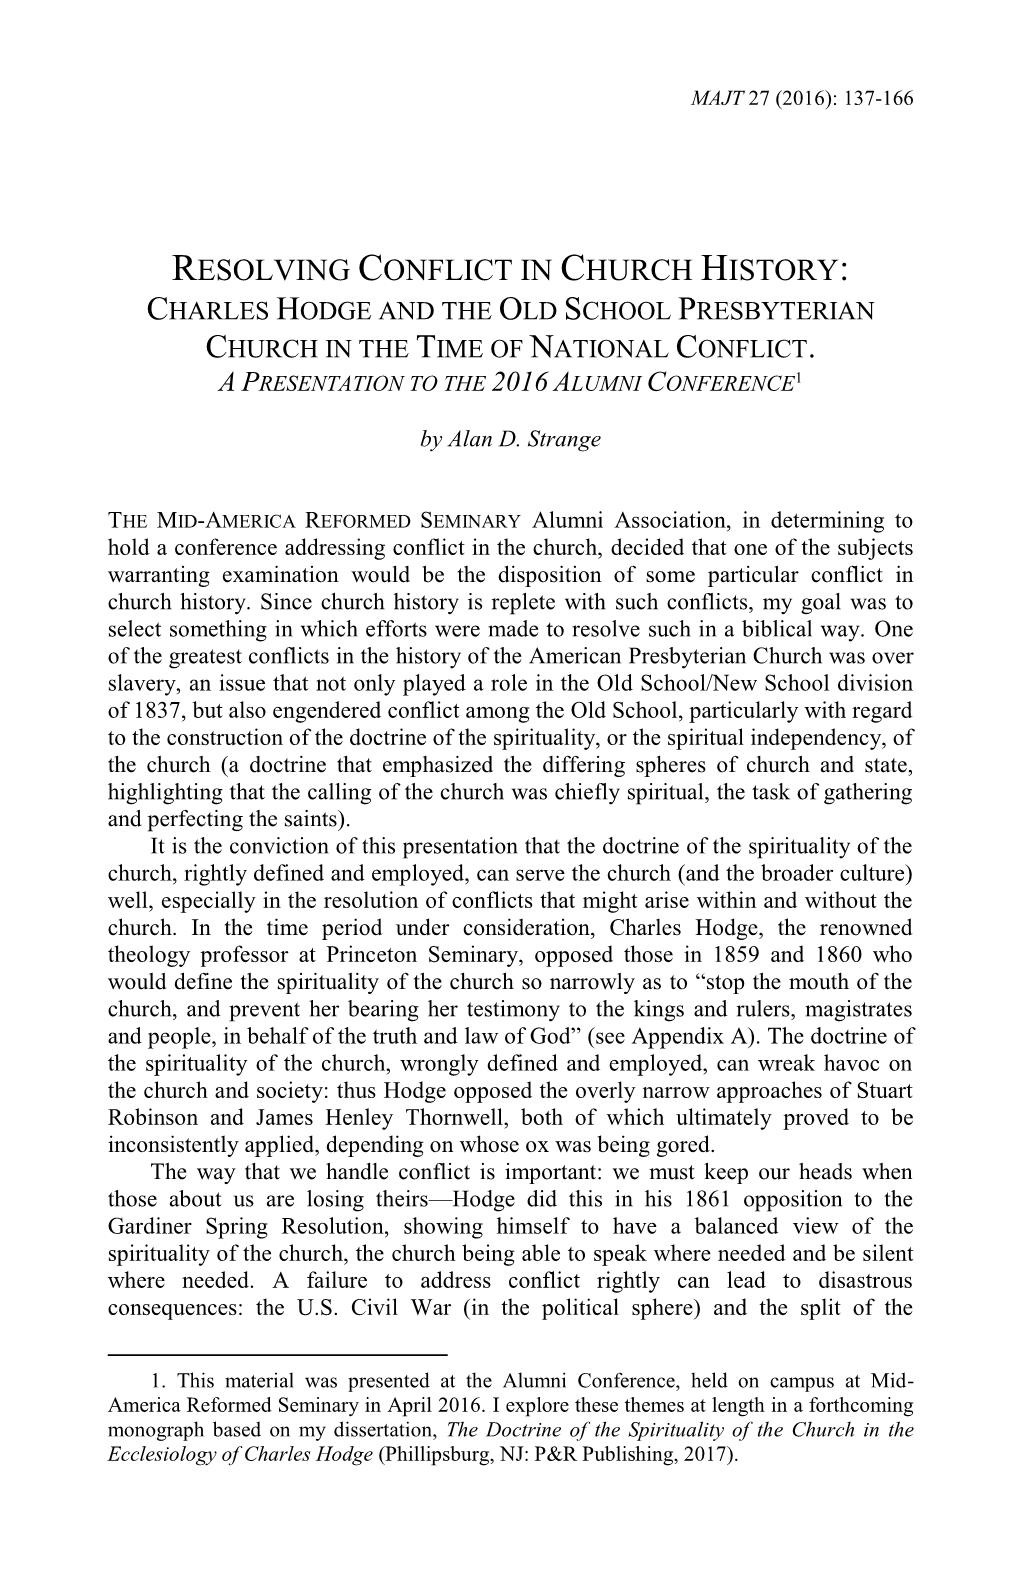 Resolving Conflict in Church History: Charles Hodge and the Old School Presbyterian Church in the Time of National Conflict